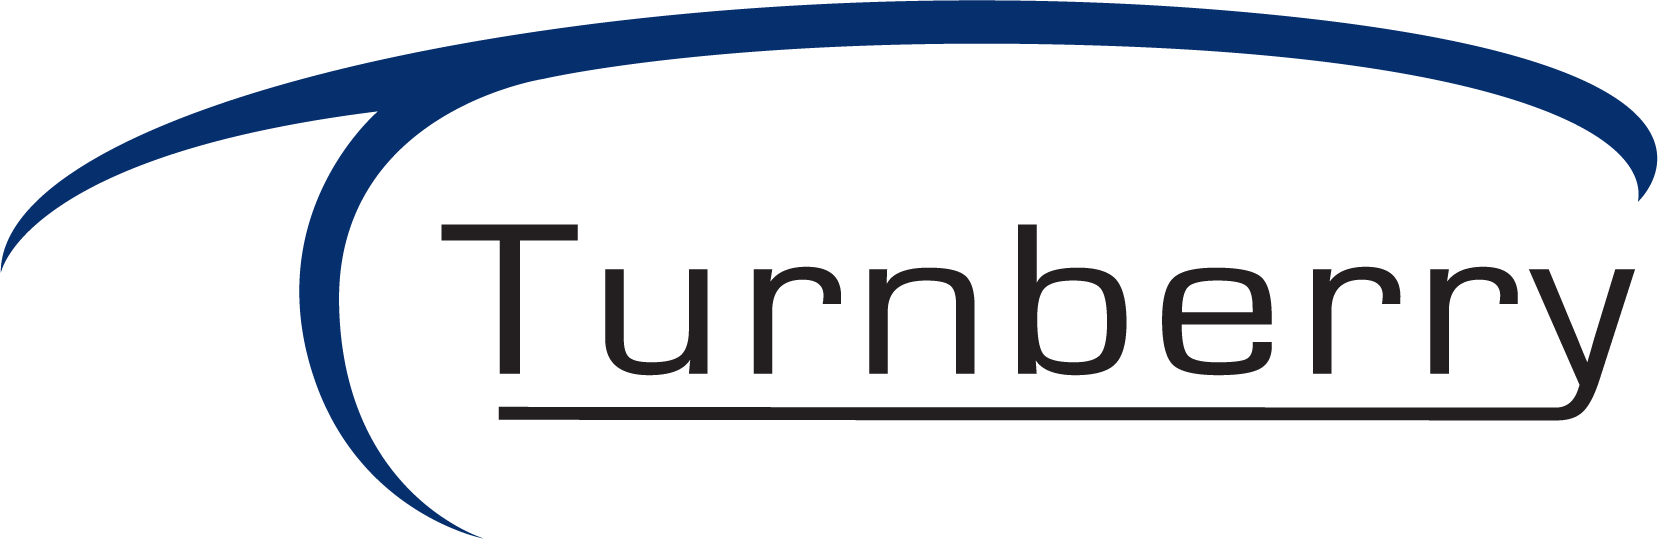 Turnberry gap cover logo. (see the picture)